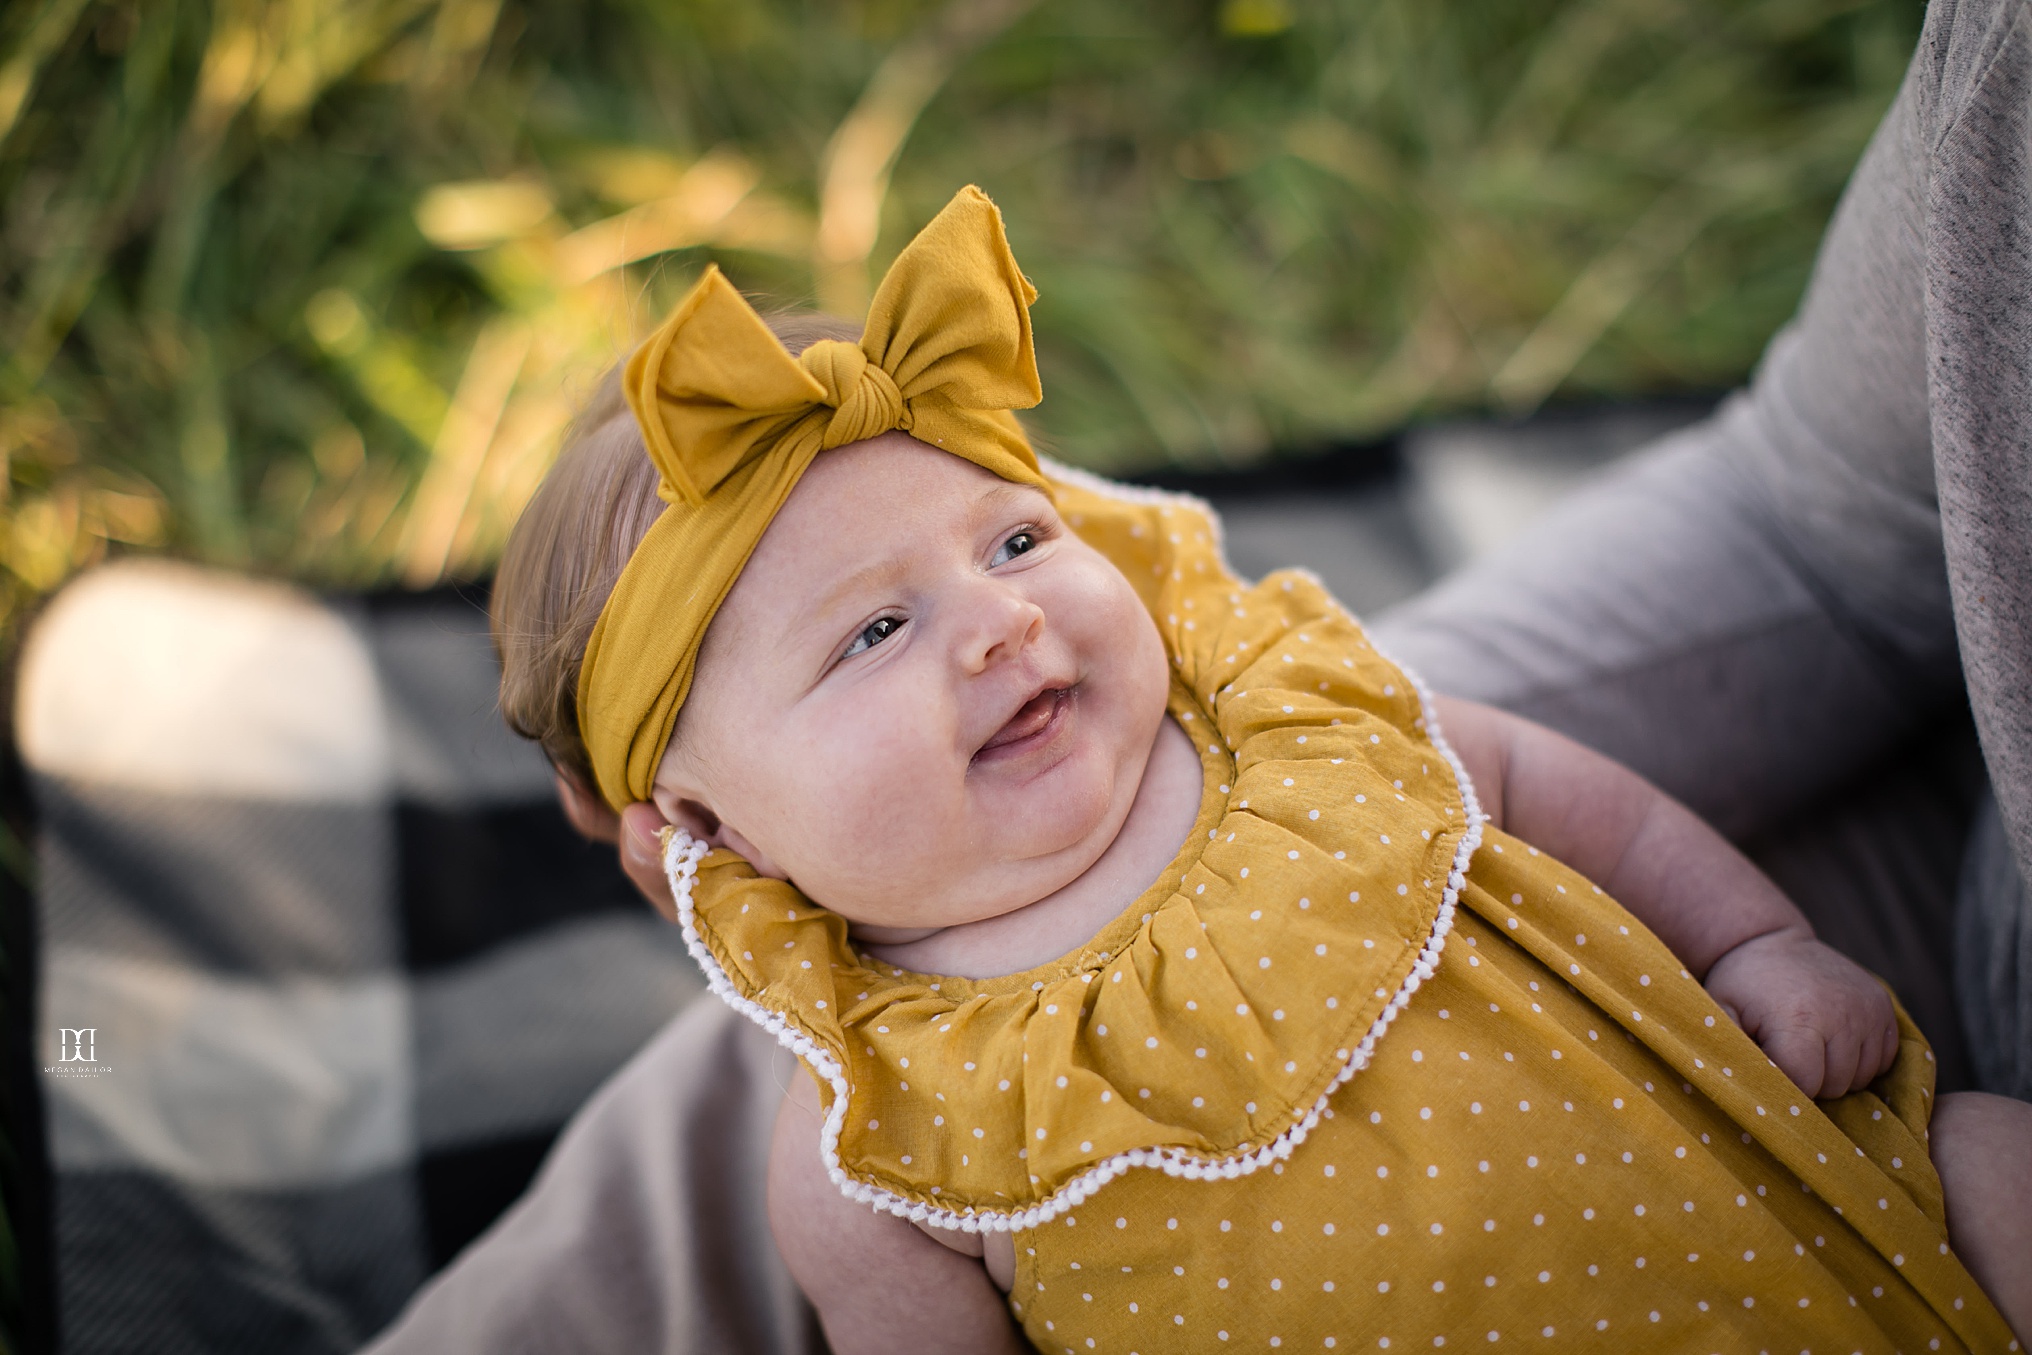 sunflower family photos in rochester smiling infant